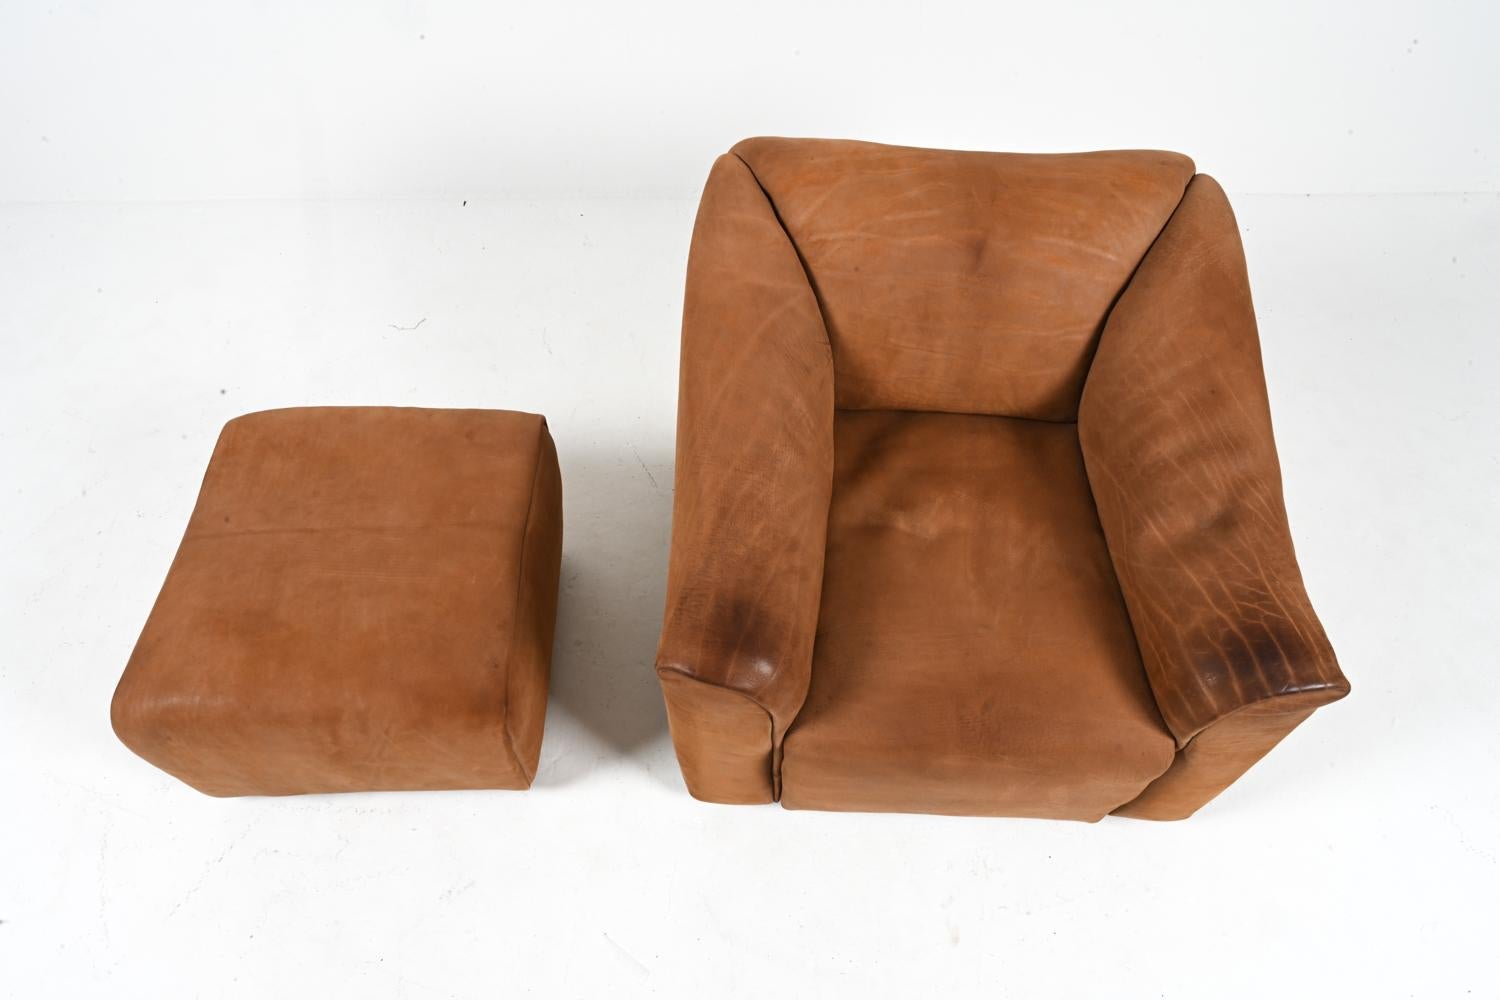 De Sede DS-47 Lounge Chair & Ottoman in Nubuck Leather, c. 1970's For Sale 1